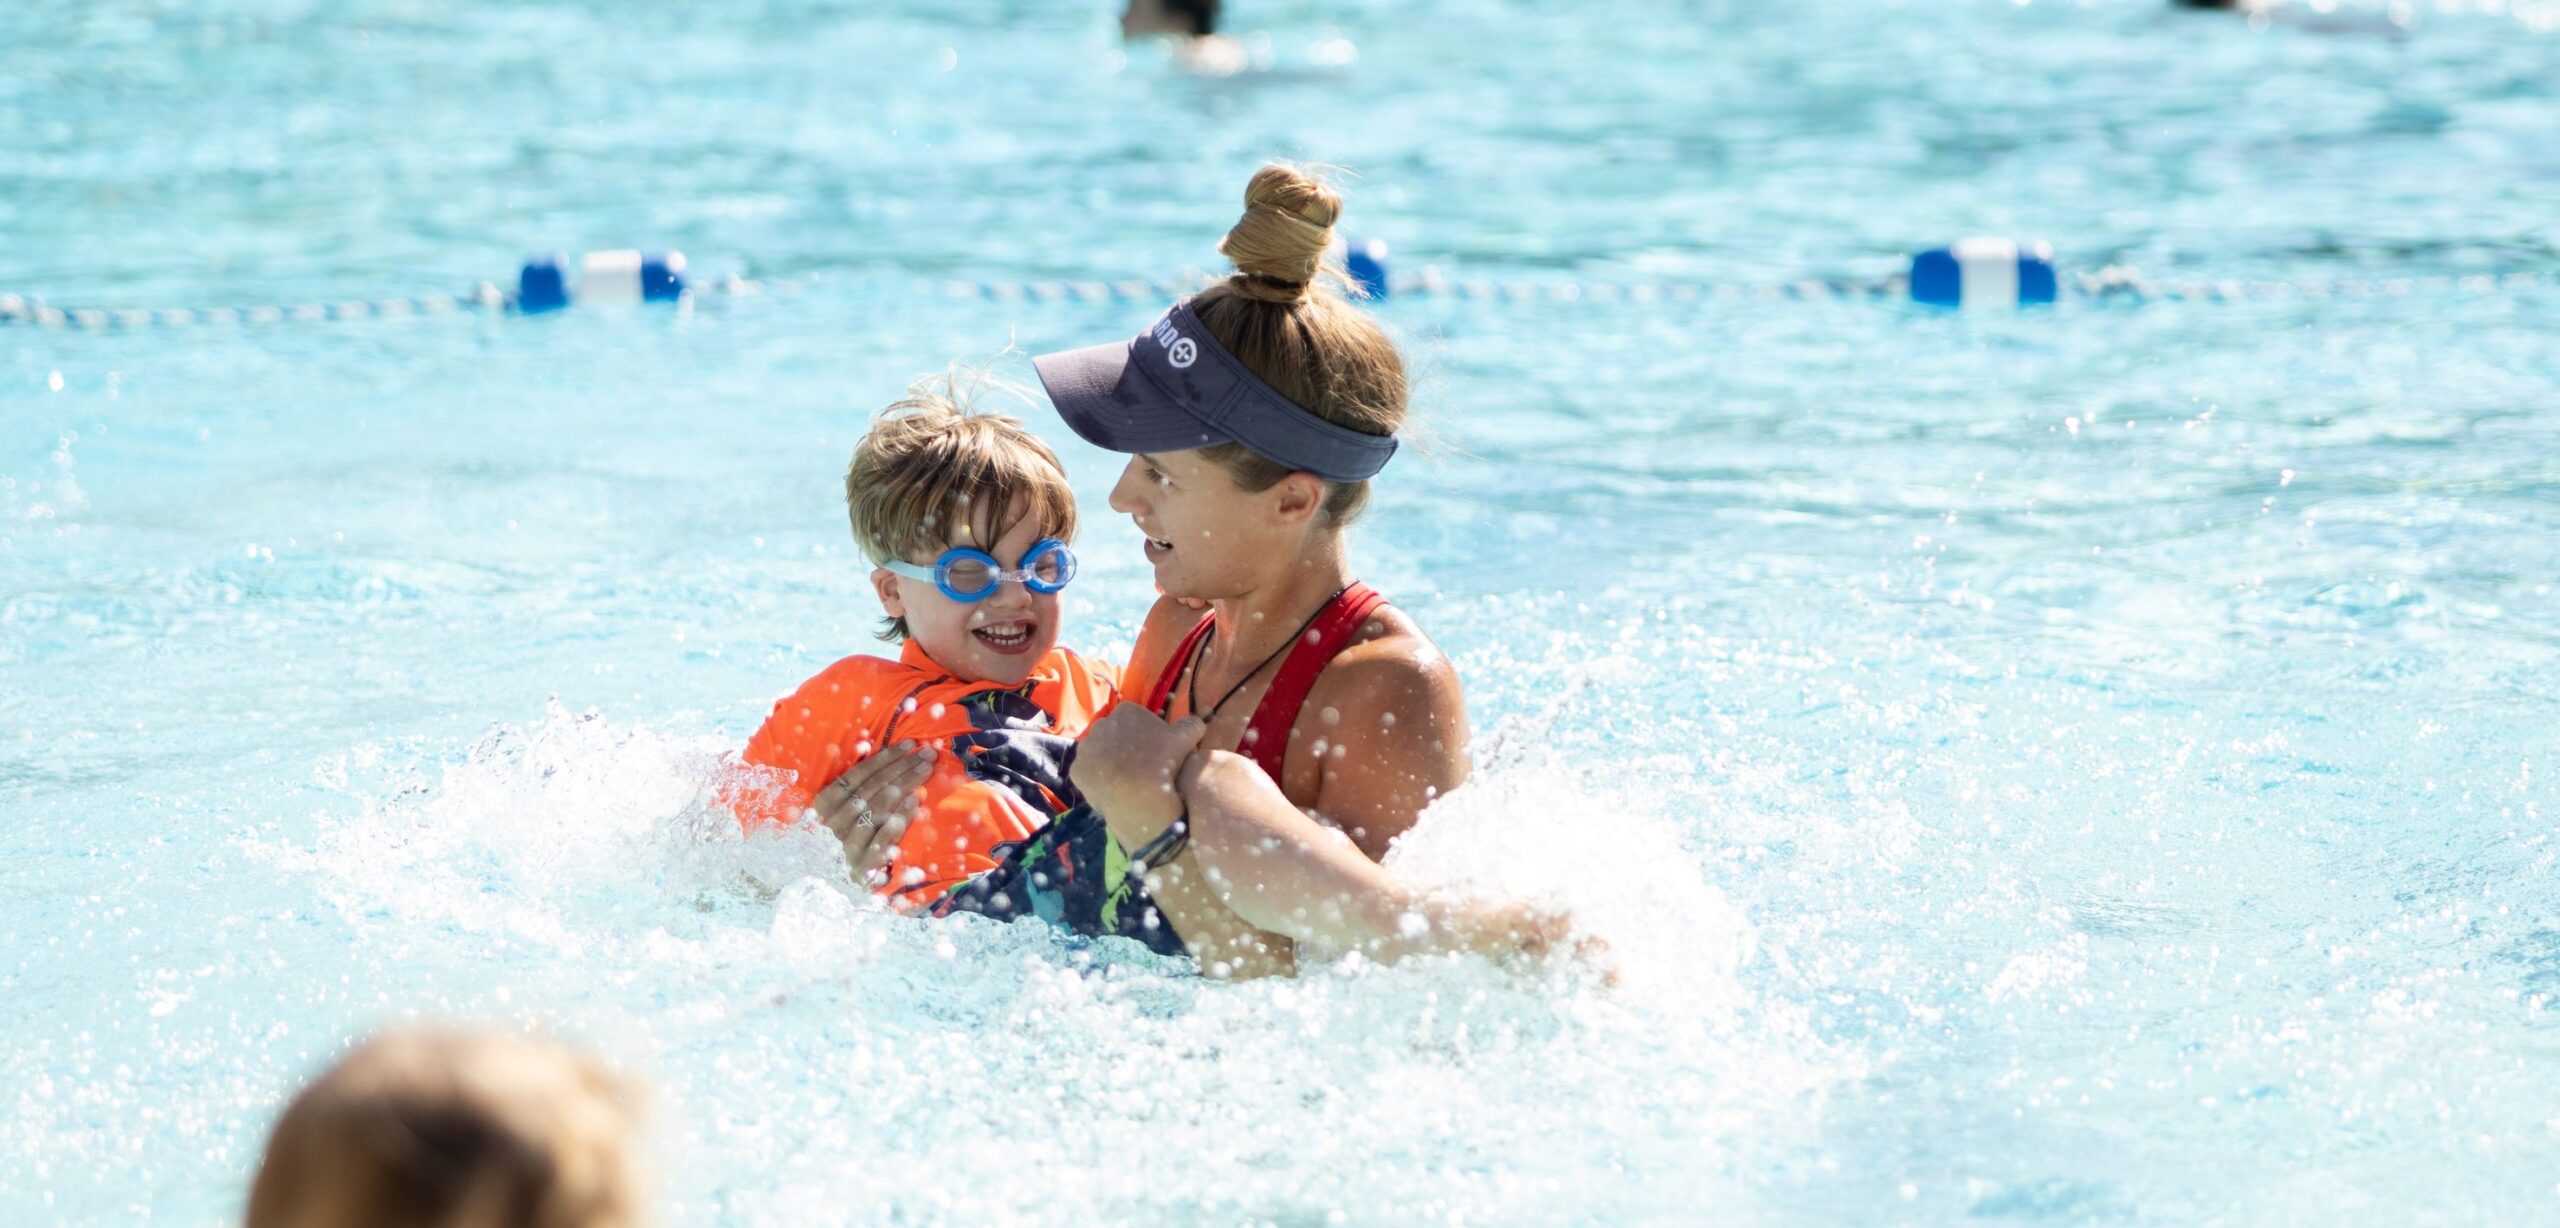 kid at swim lessons with instructor helping him swim